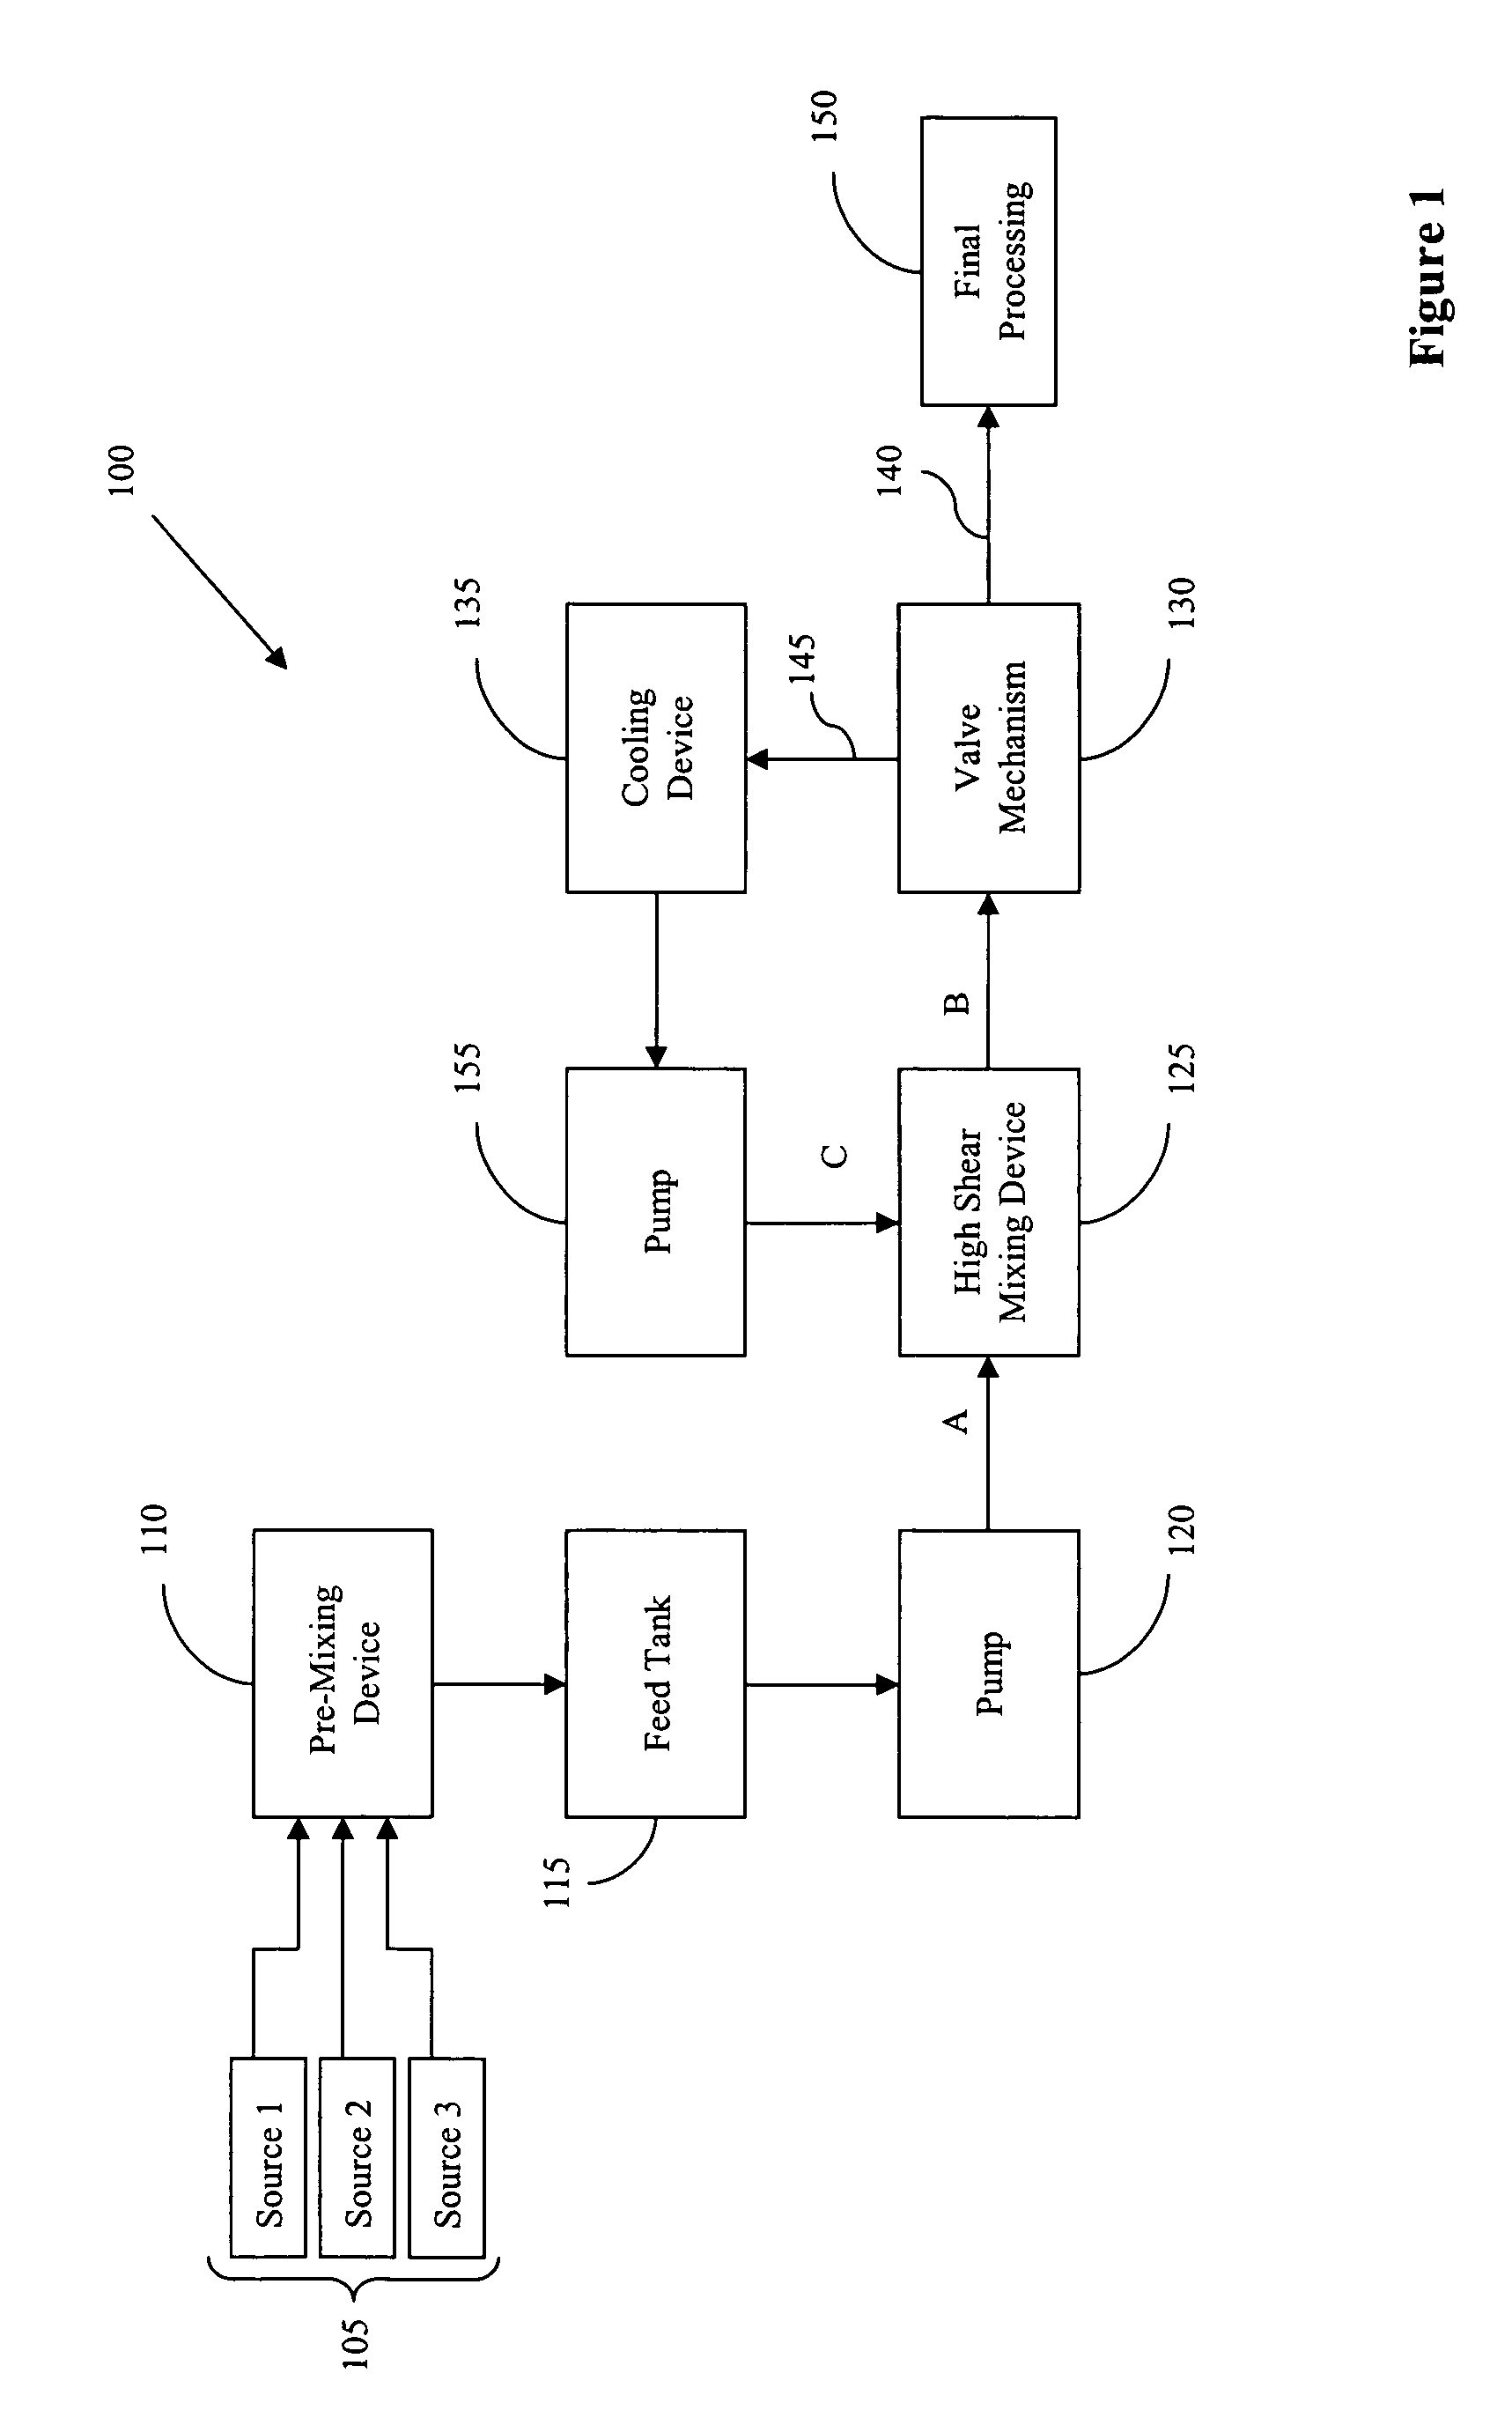 System and method for heat treating a homogenized fluid product